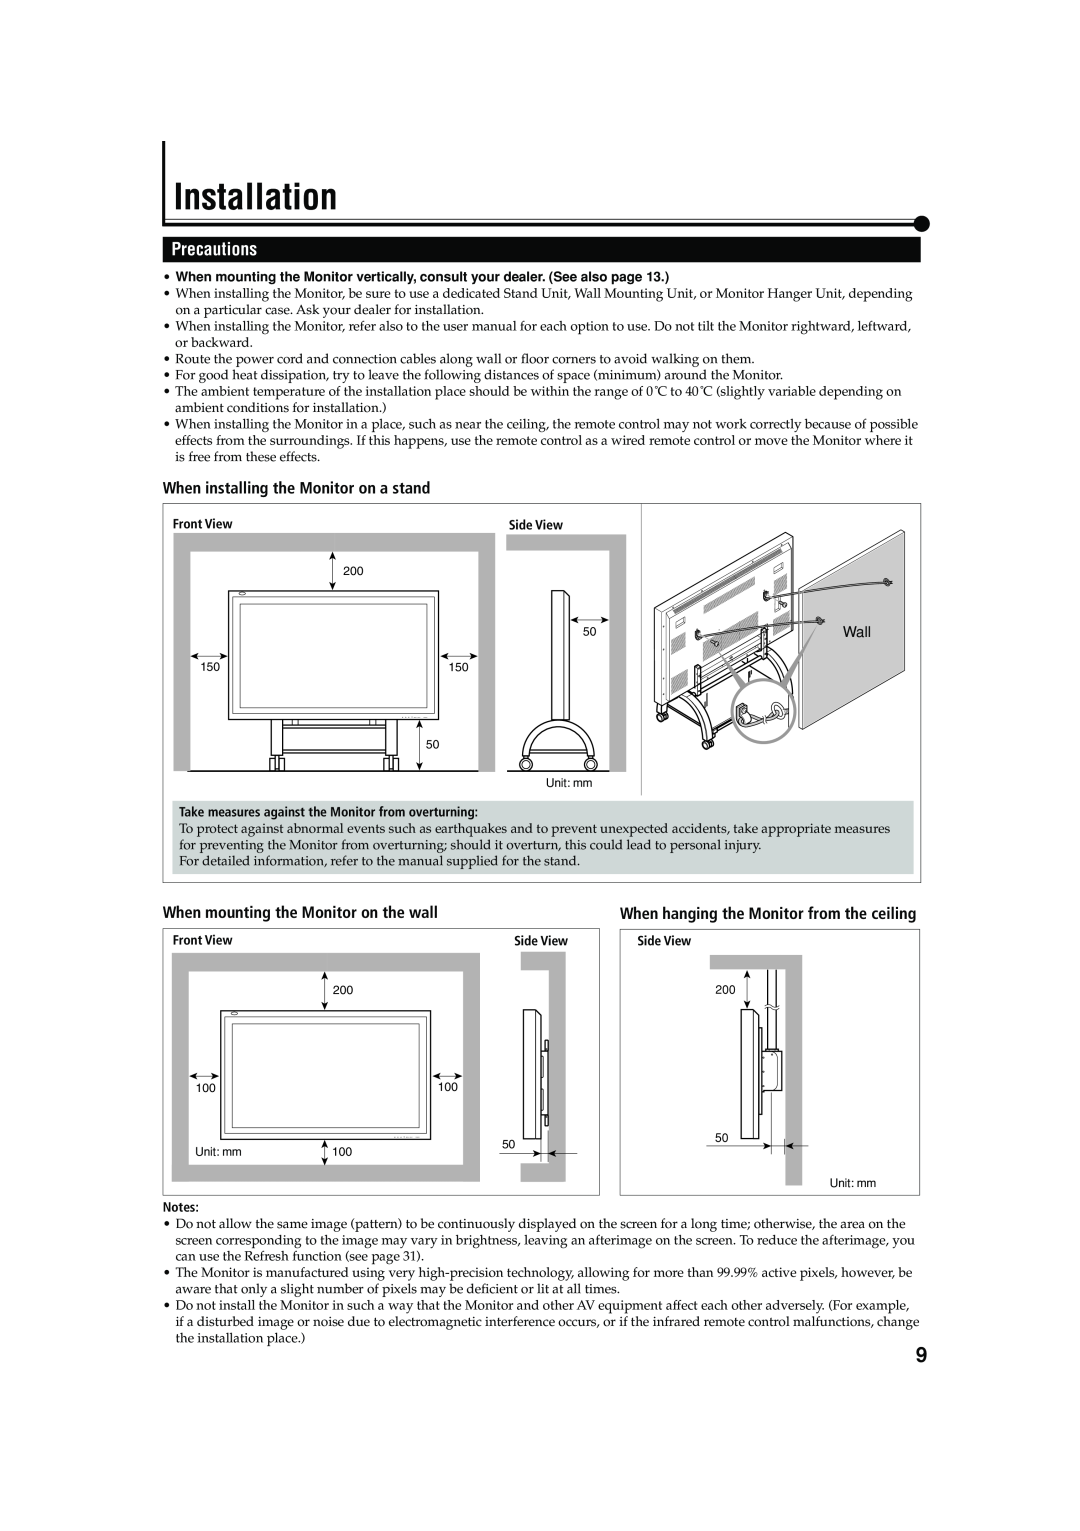 JVC GM-V42C manual Installation, Precautions, When installing the Monitor on a stand, When mounting the Monitor on the wall 